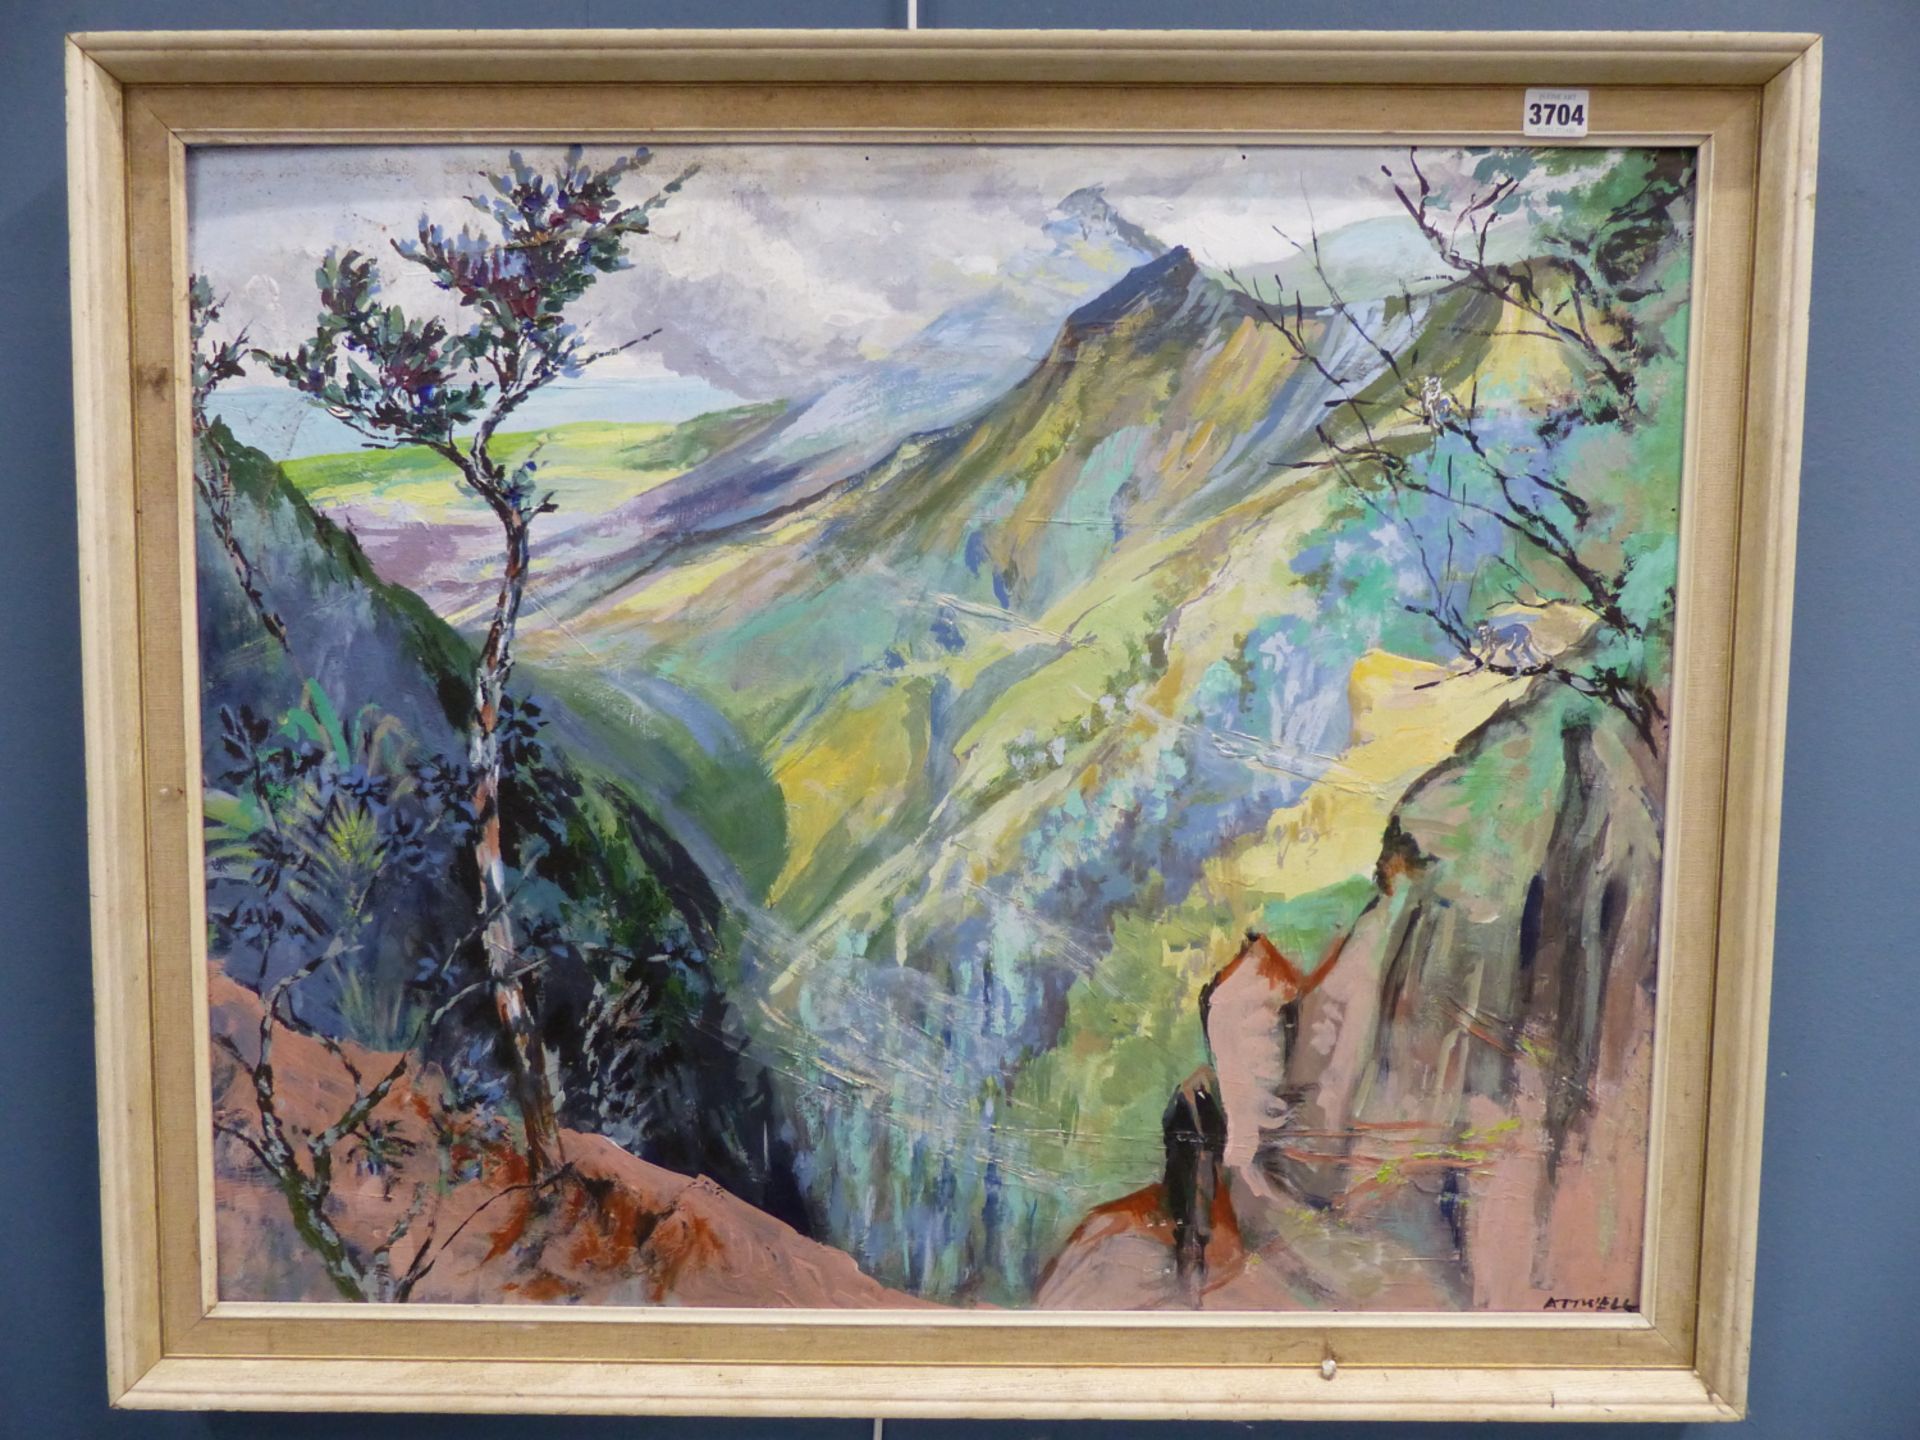 IVY T. ATTWELL (1895-1985) A MOUNTIANOUS VALLEY. OIL ON BOARD. SIGNED L/R. 74 X 59 cm.